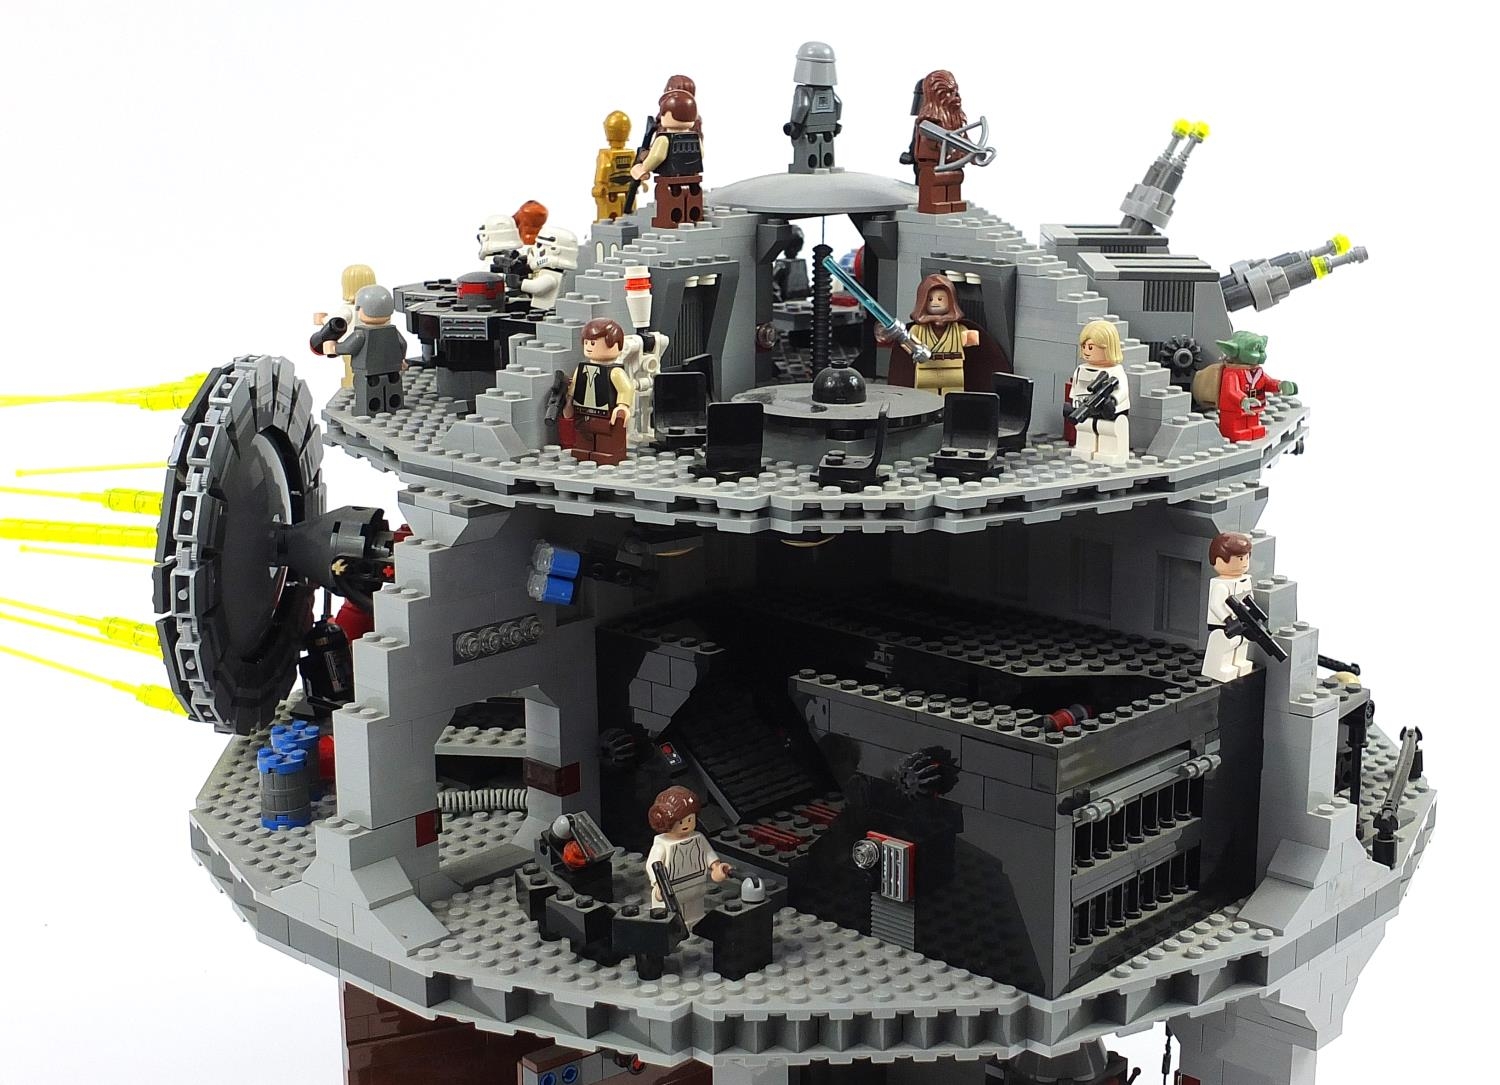 Completed Lego Star Wars Death Star with instructions no 10188, 41cm high - Image 6 of 7